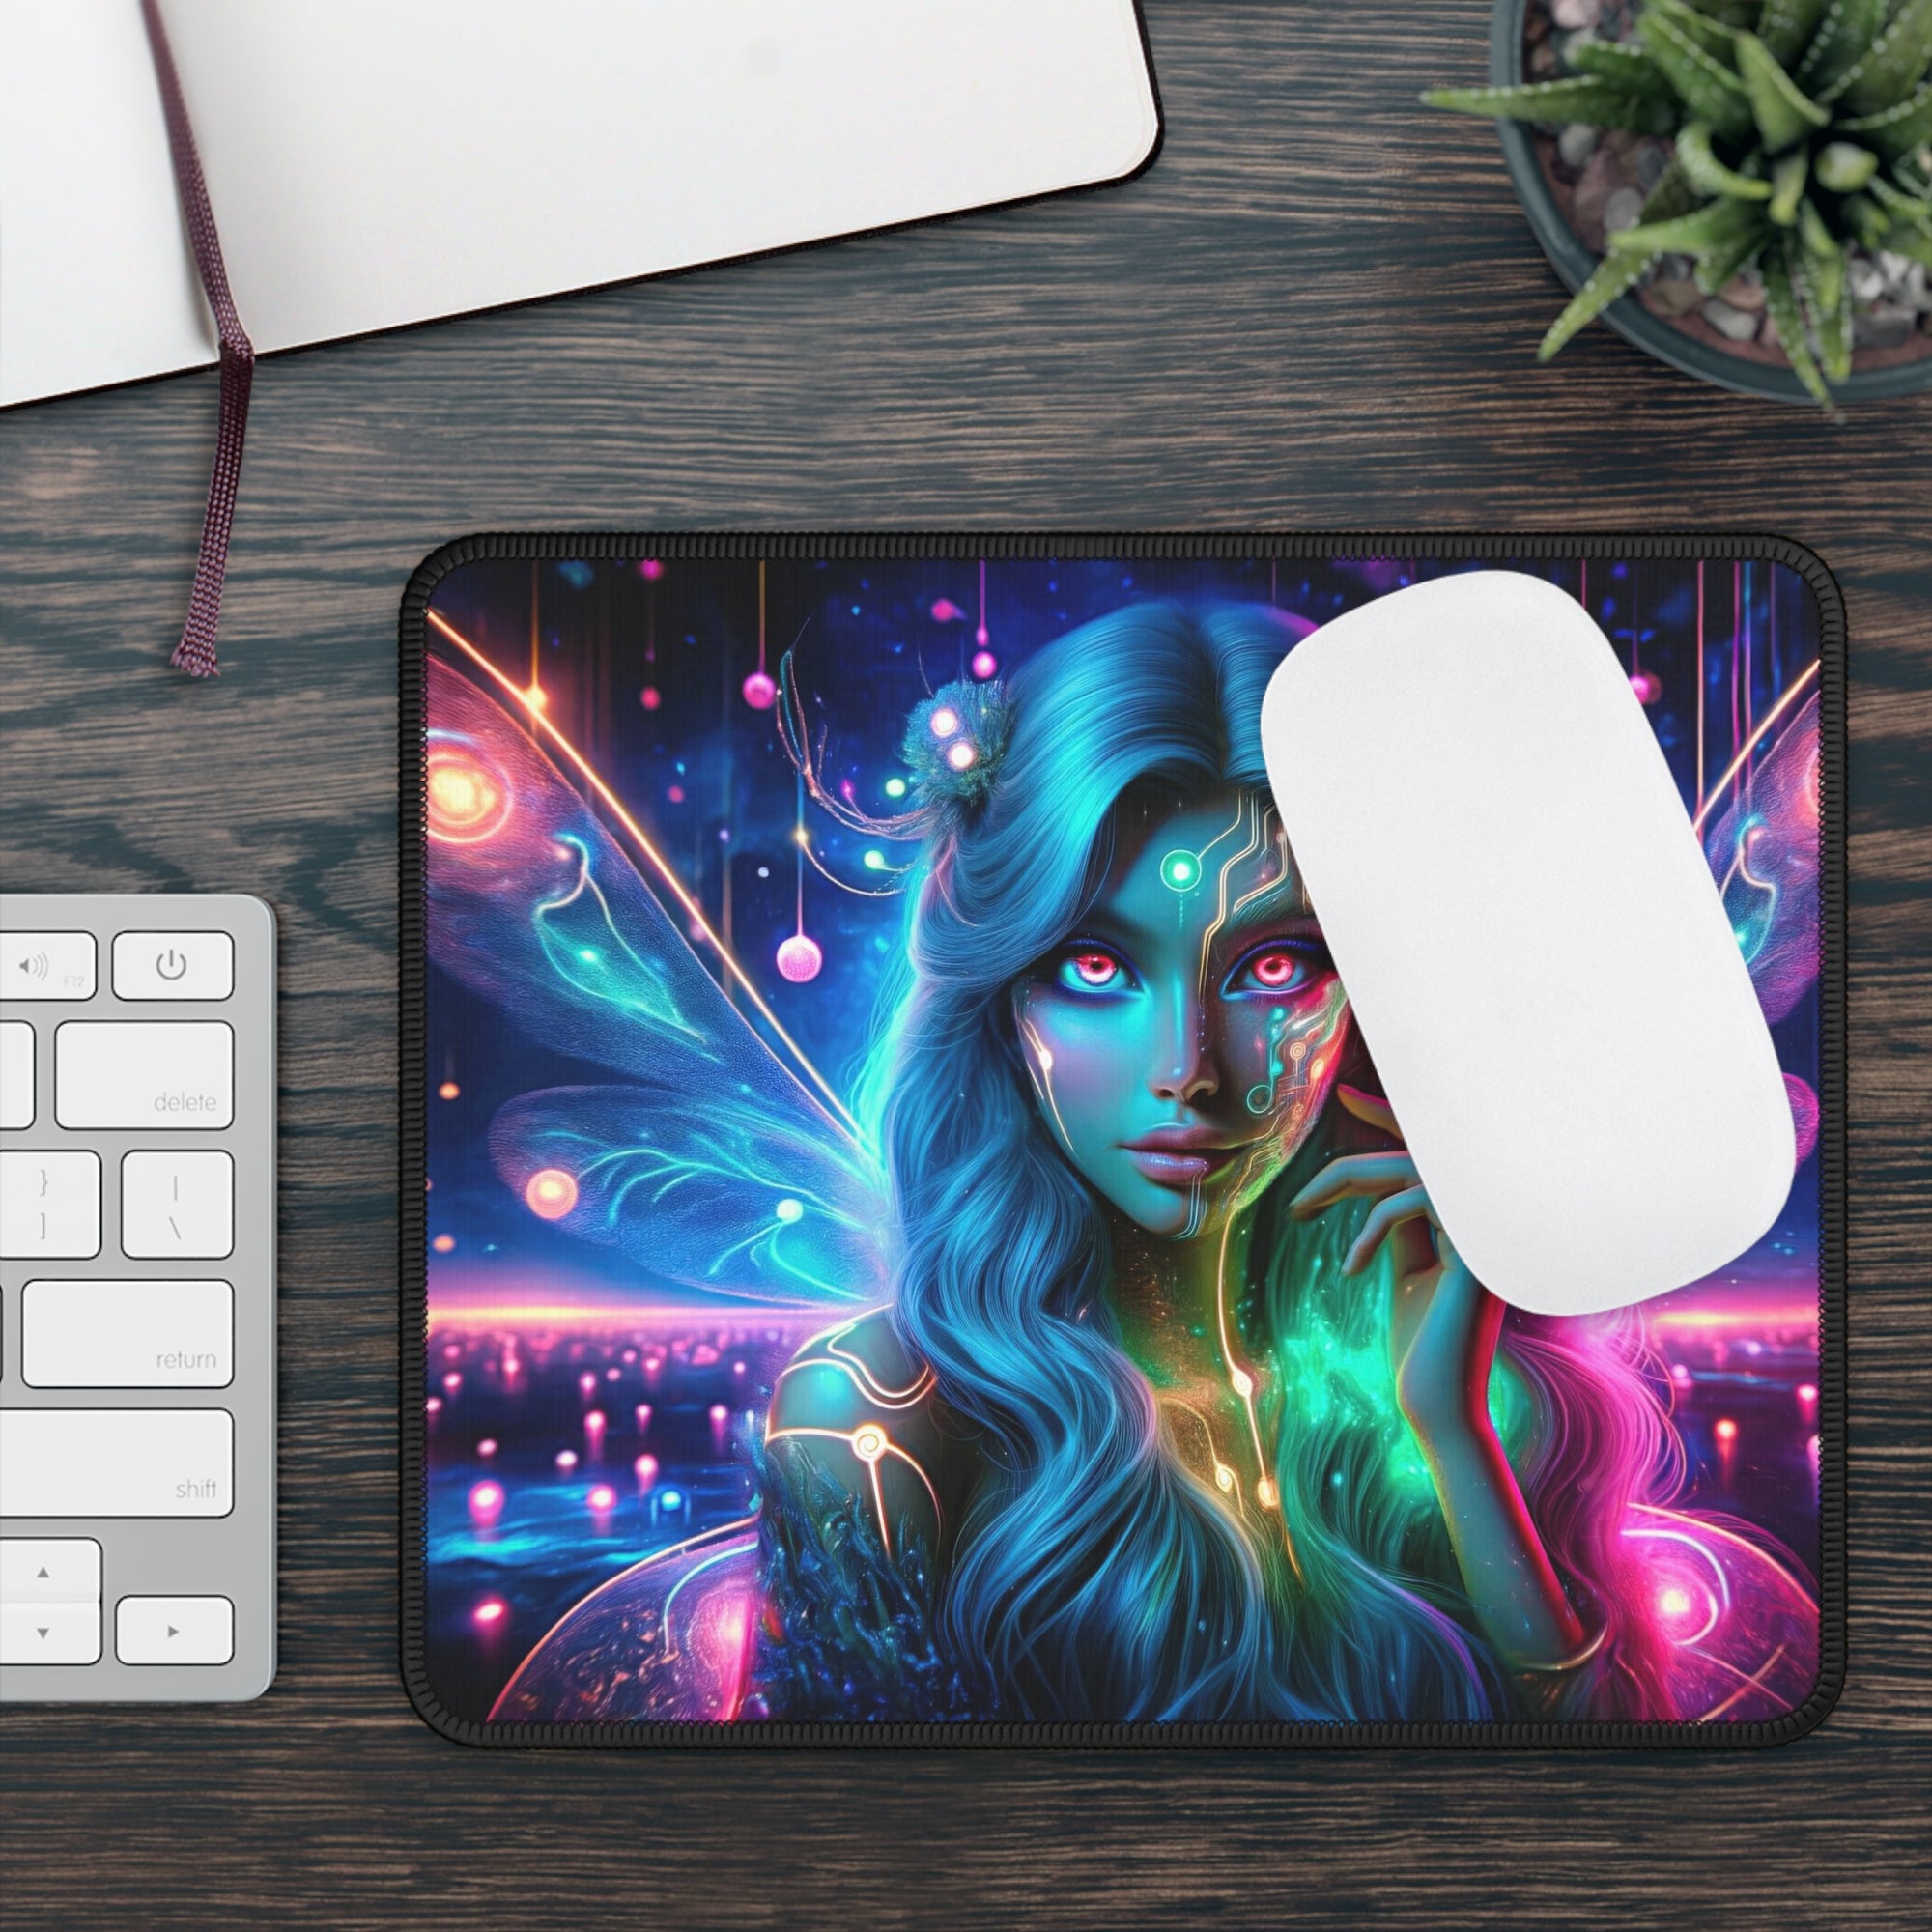 The Pixel Pixie's Playground Gaming Mouse Pad